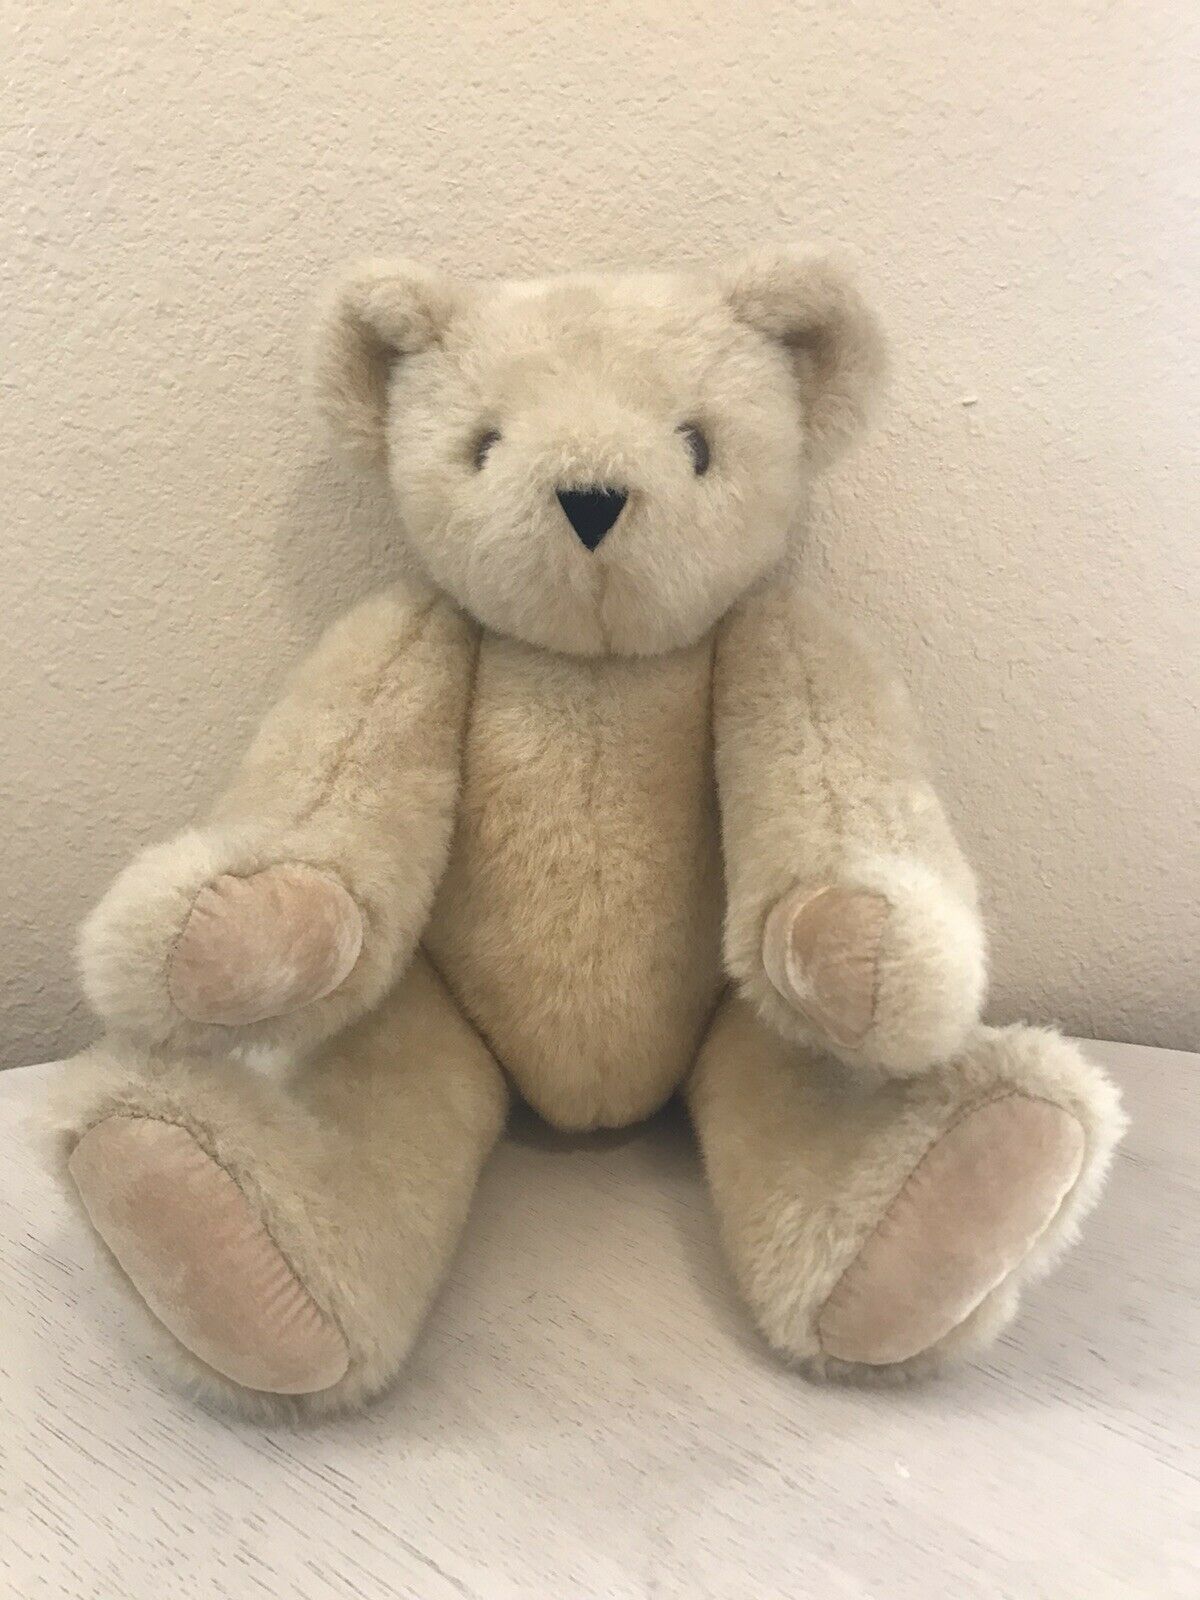 1997 Vintage Vermont Teddy Bear Light Blonde Jointed Posable 16” Plush Toy